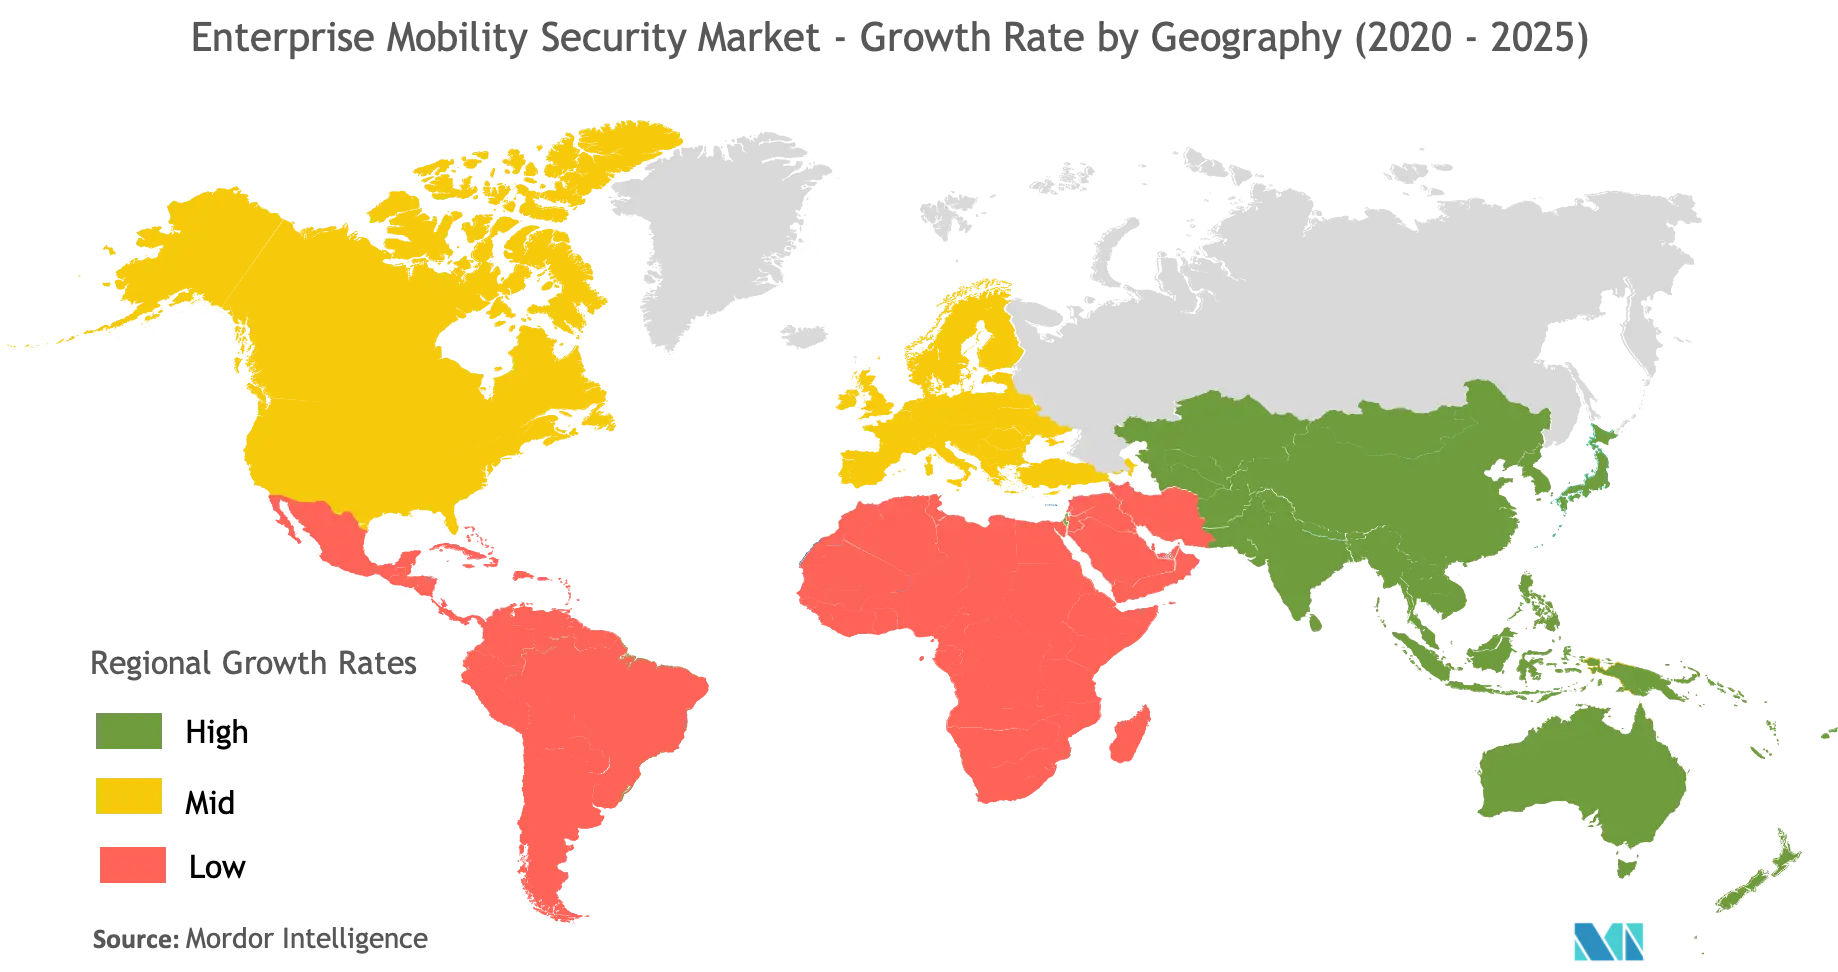 mobile device security market